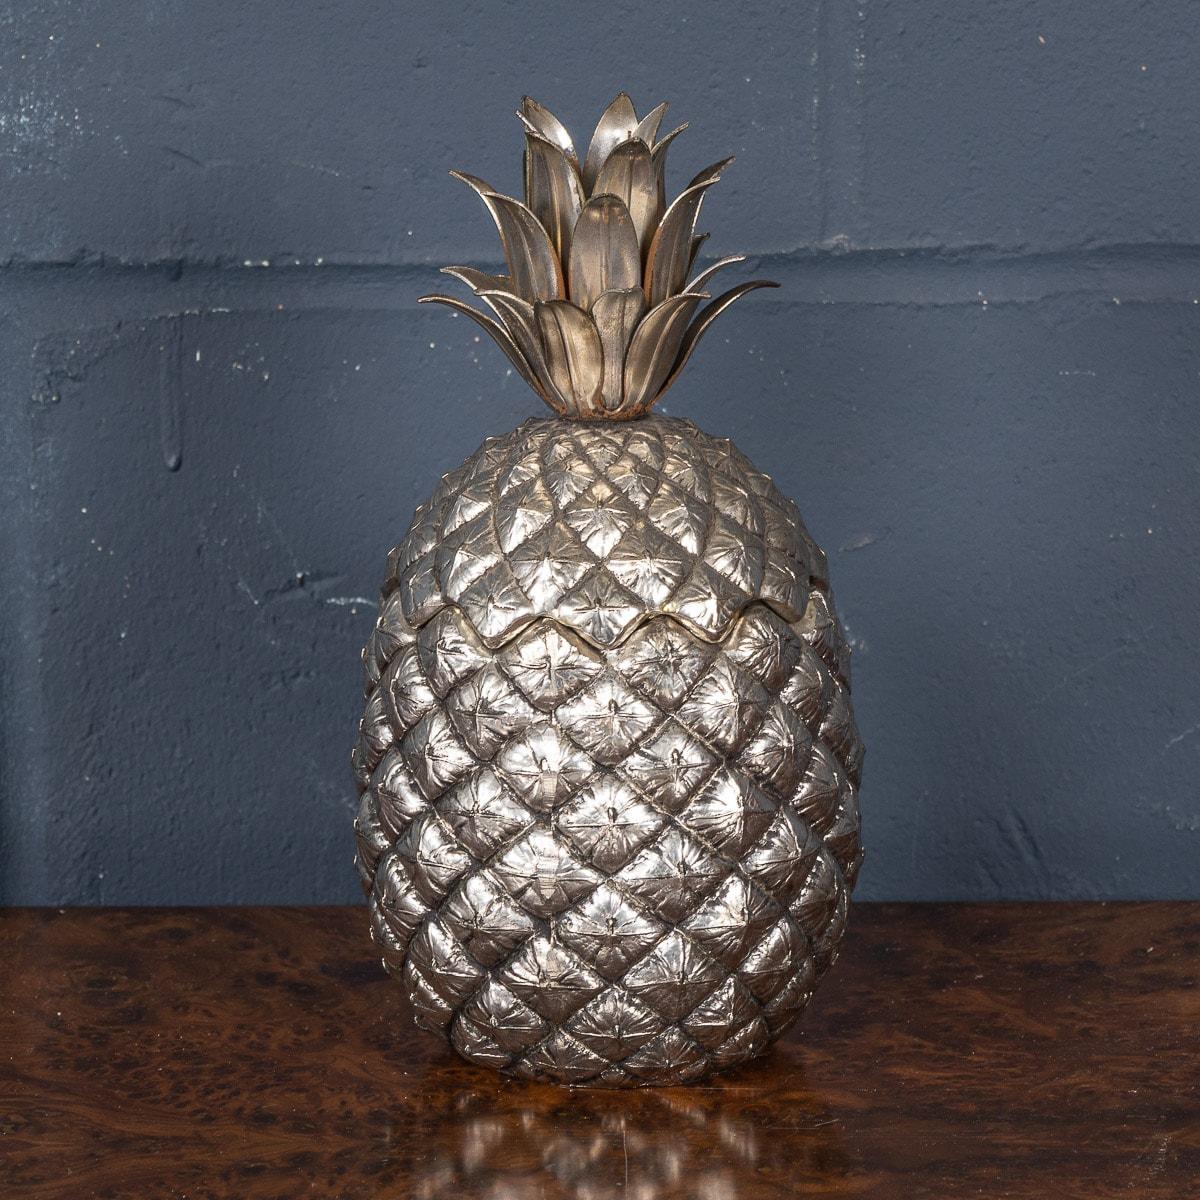 A beautiful ice bucket by Mauro Manetti, made in Italy around the 1970s. Fashioned as a pineapple, this silvered pewter ice bucket was designed by Mauro Manetti for the Fonderia D’Arte foundry in Florence, Italy. Stamped to the